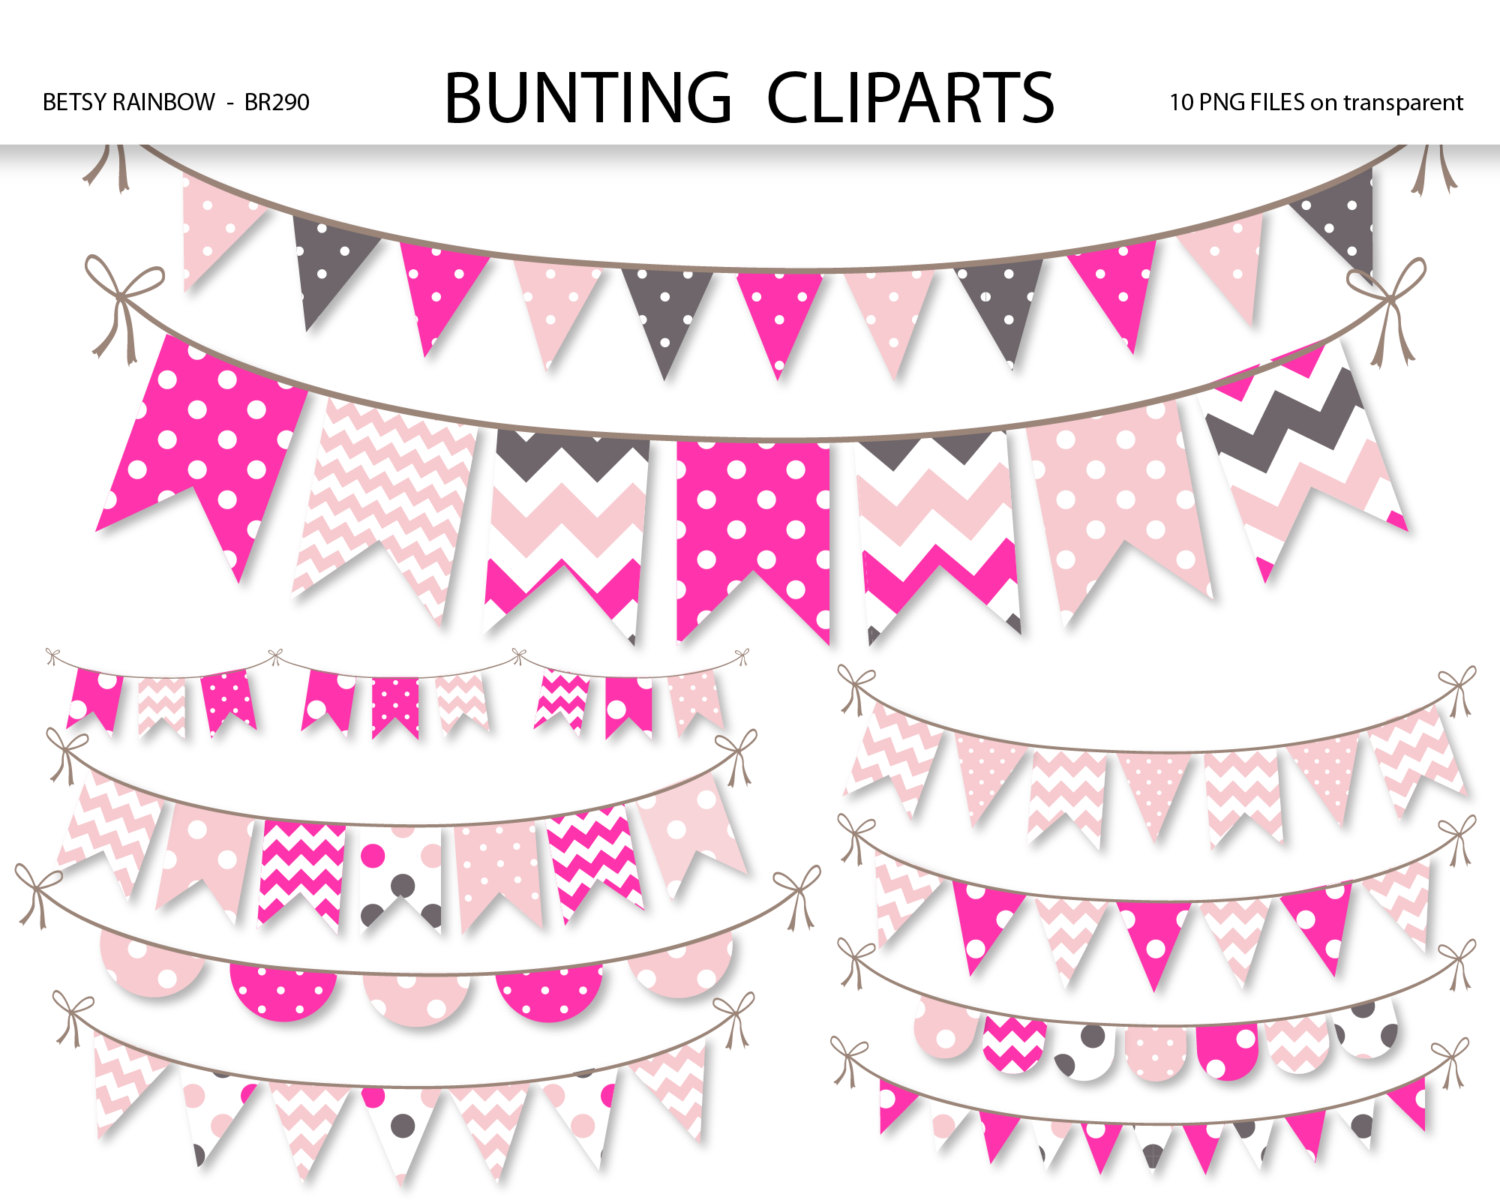 Popular items for clipart bunting on Etsy